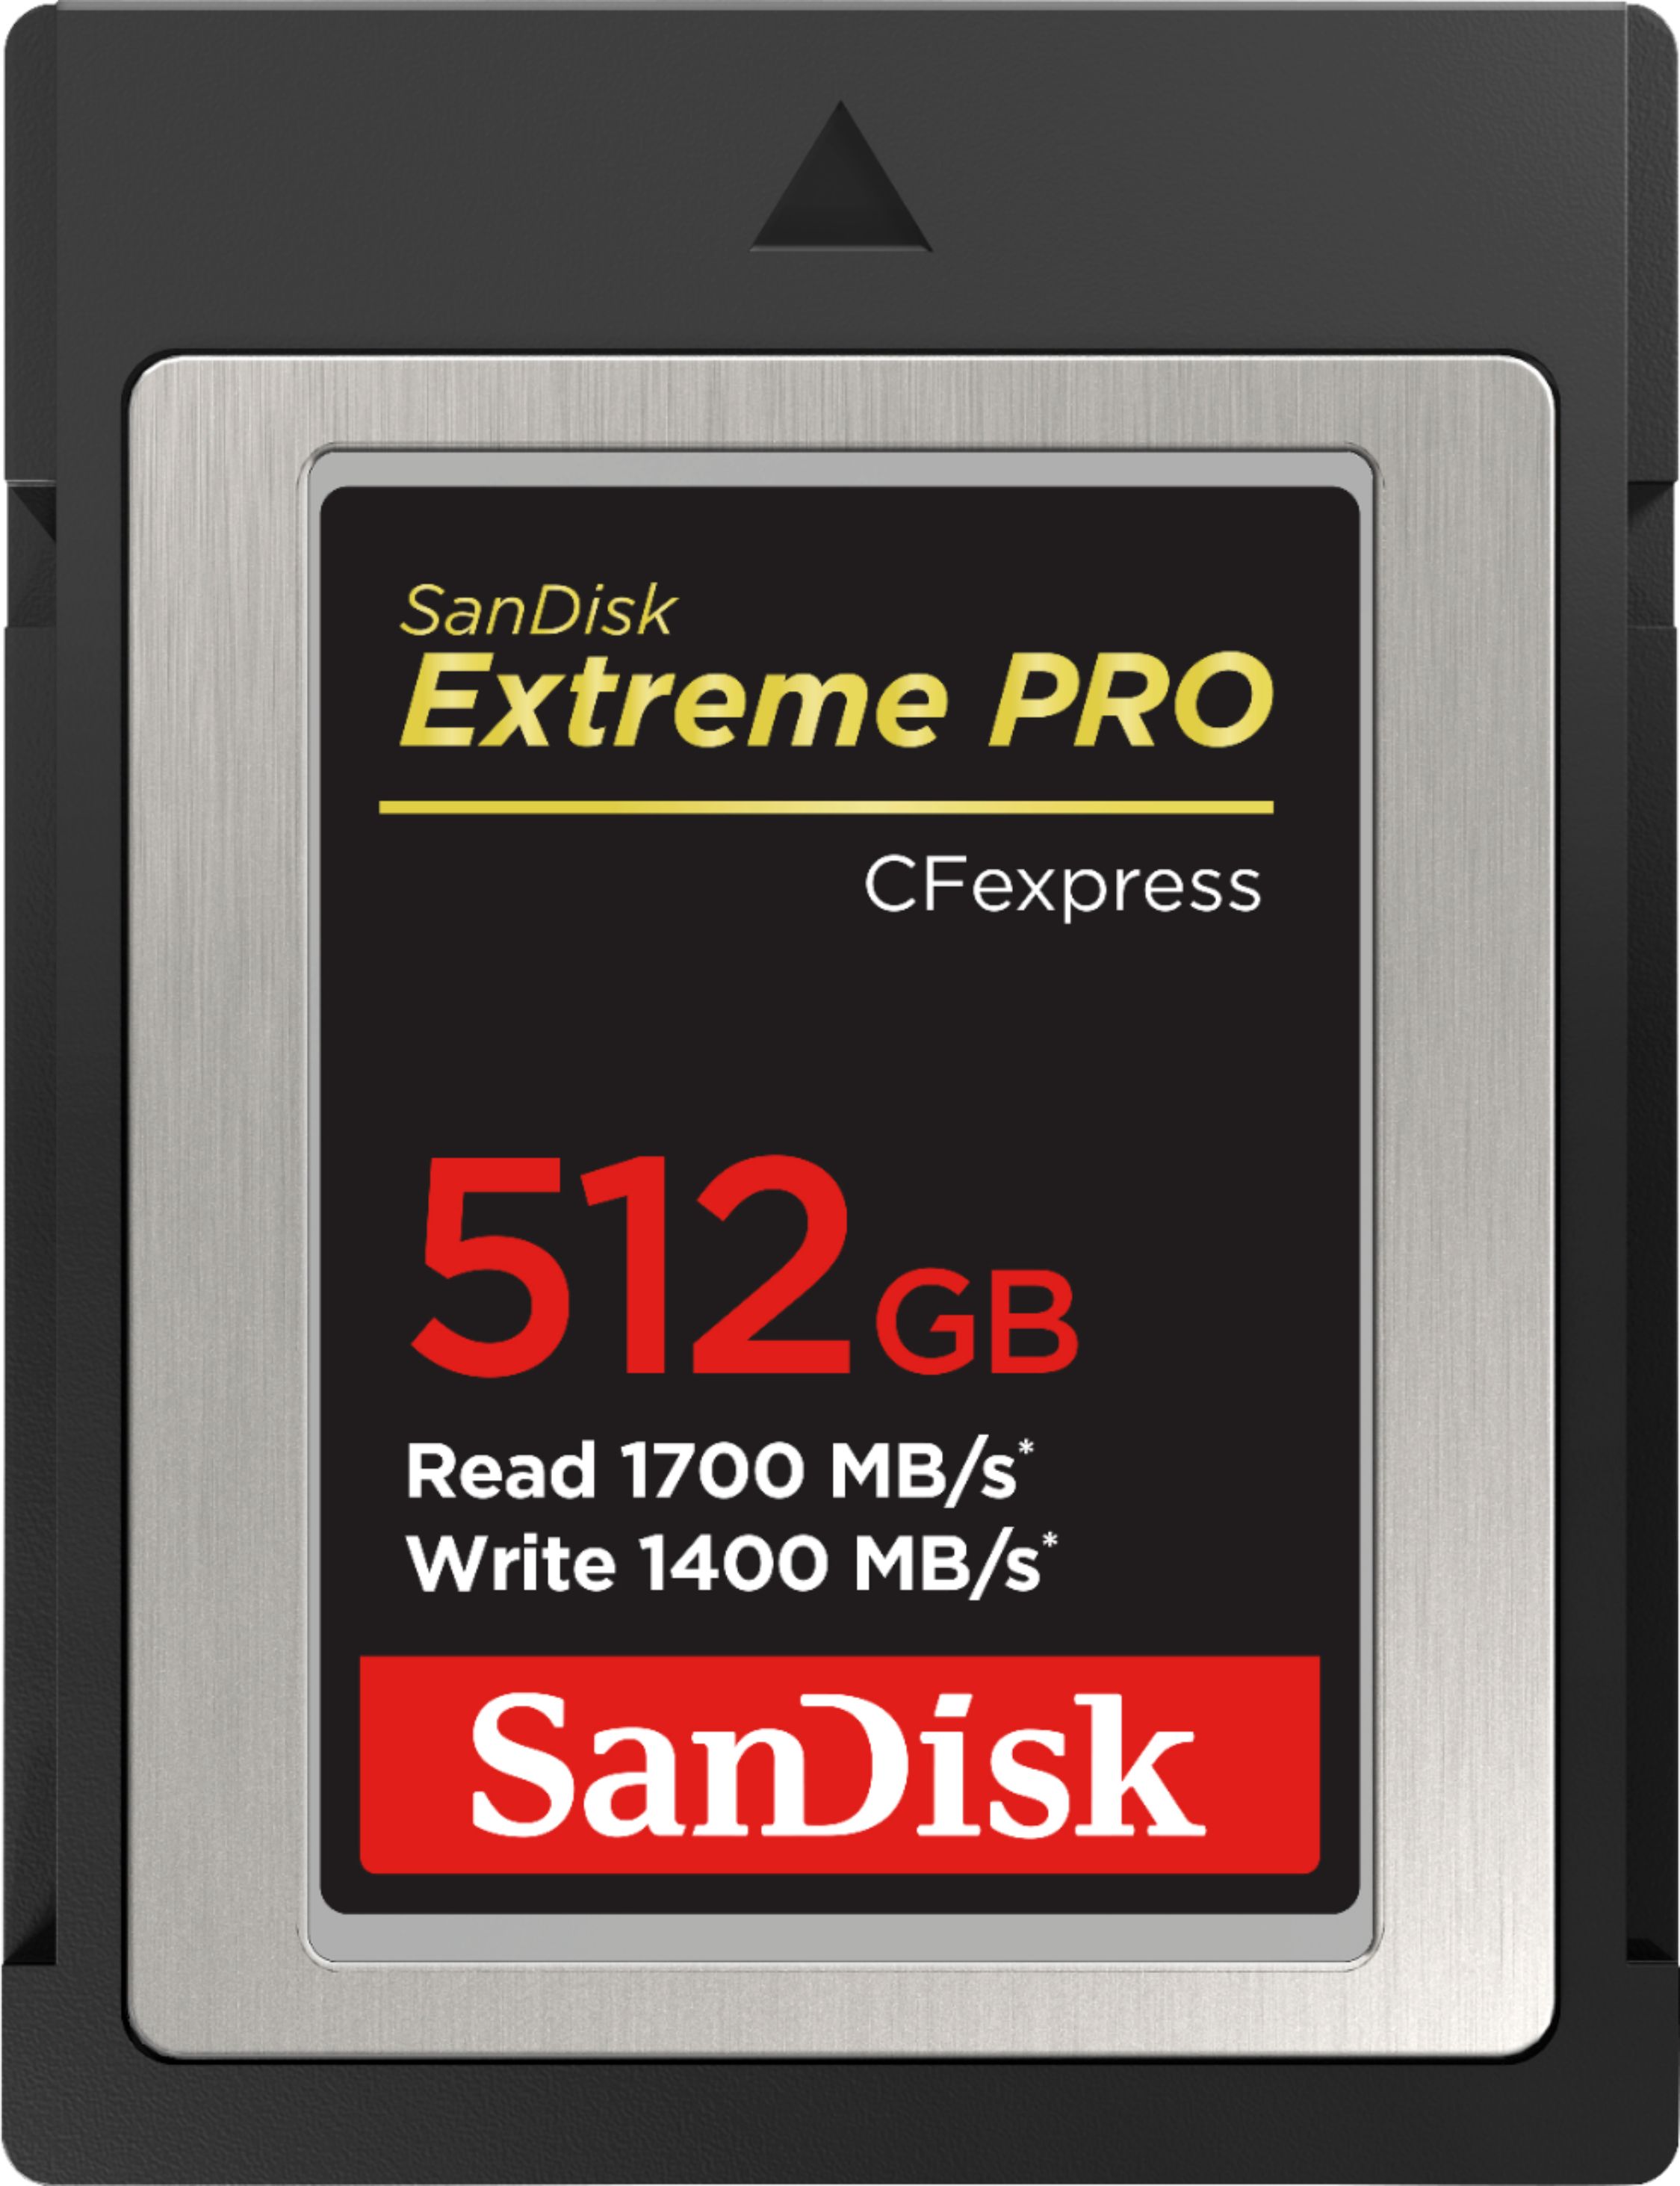 SanDisk 512GB Extreme PRO CFexpress Memory Card SDCFE-512G-ANCNN